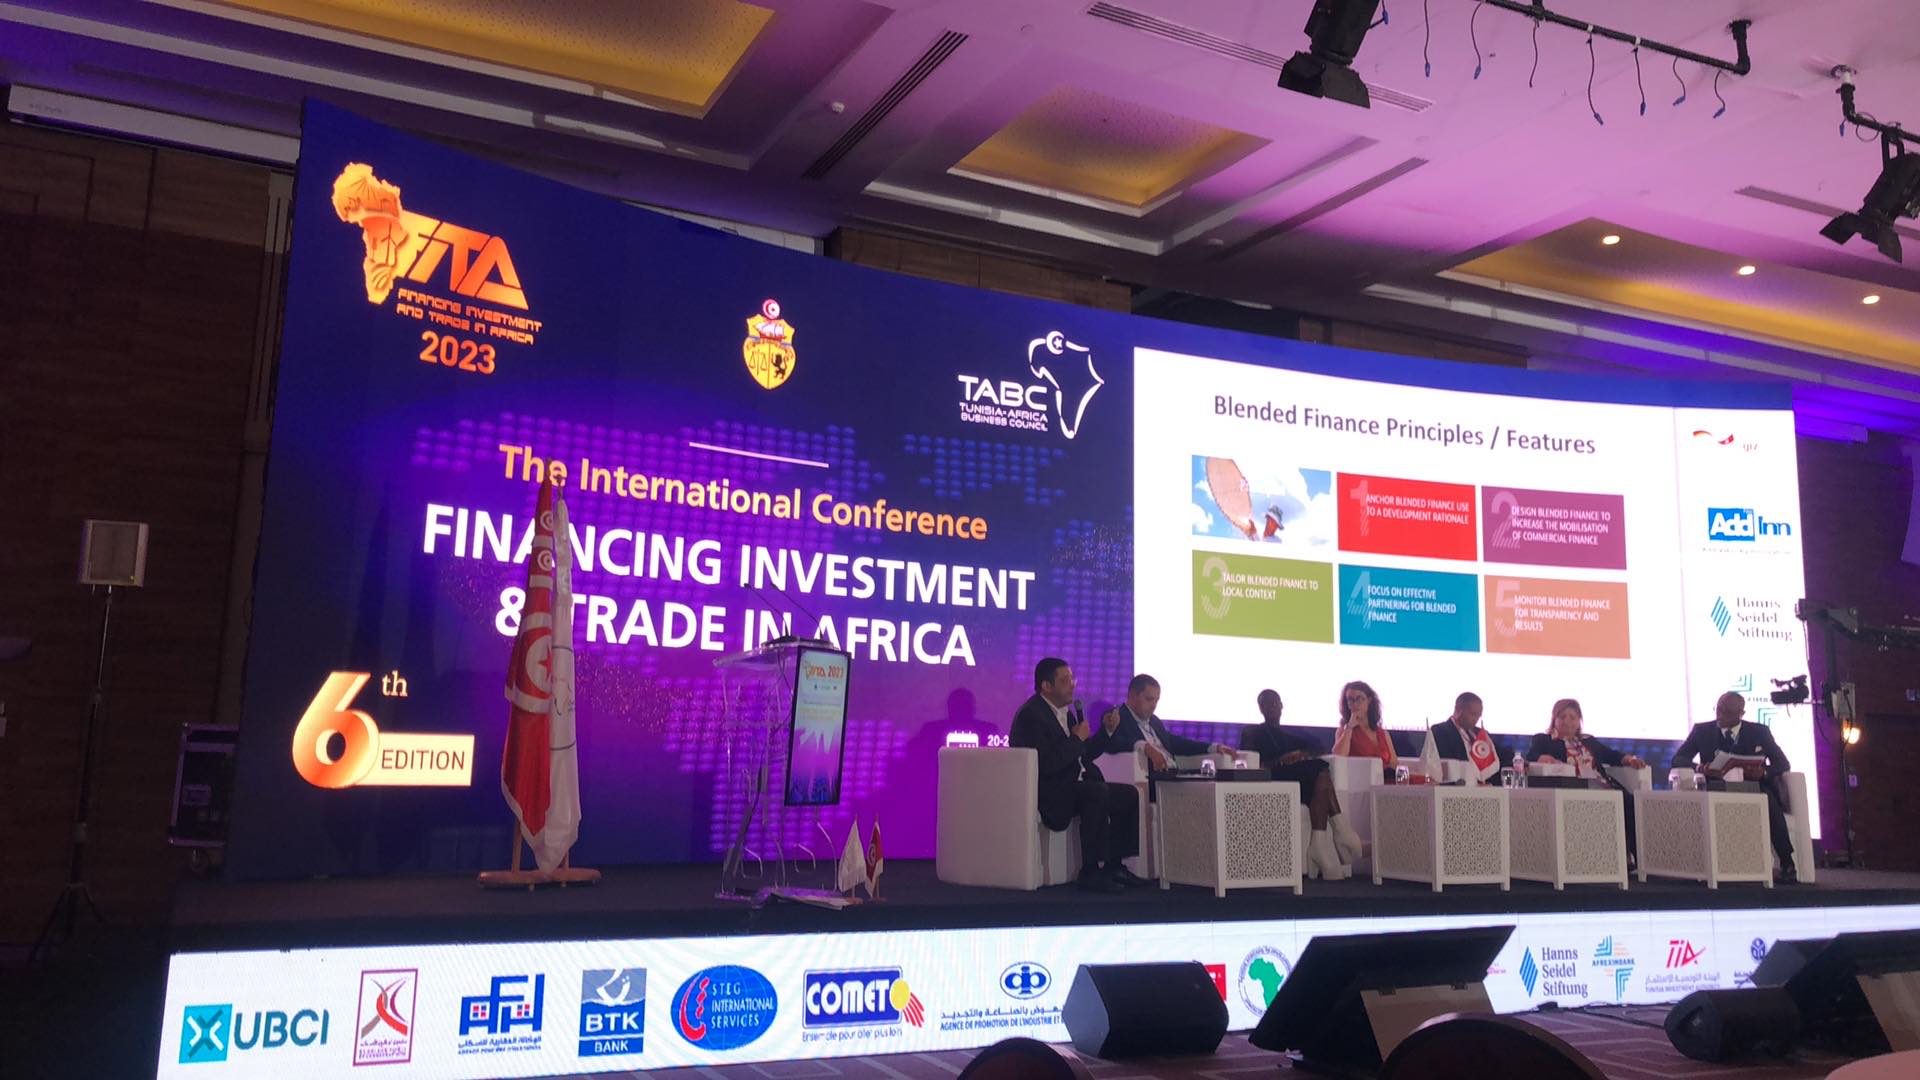 Conférence internationale FITA 2023 “Financing Investment and Trade in Africa"